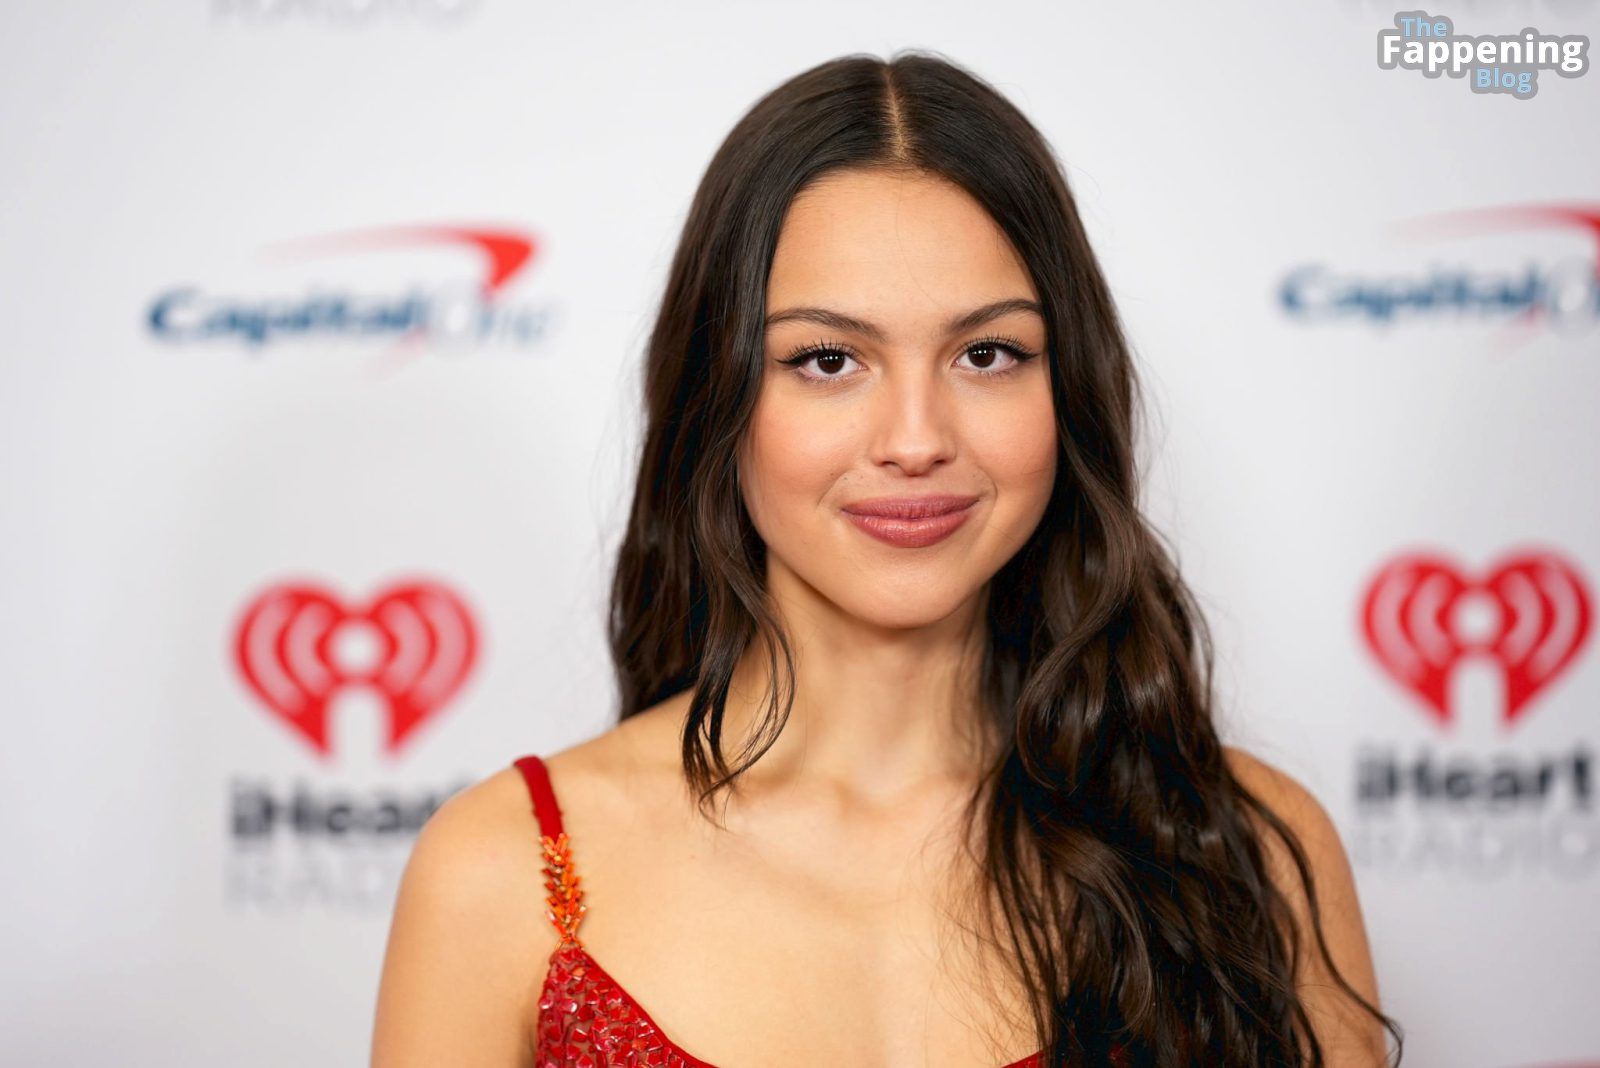 Olivia Rodrigo Displays Her Sexy Figure in a Red Dress at the 2023 Z100’s IHeartRadio Jingle Ball (48 Photos)